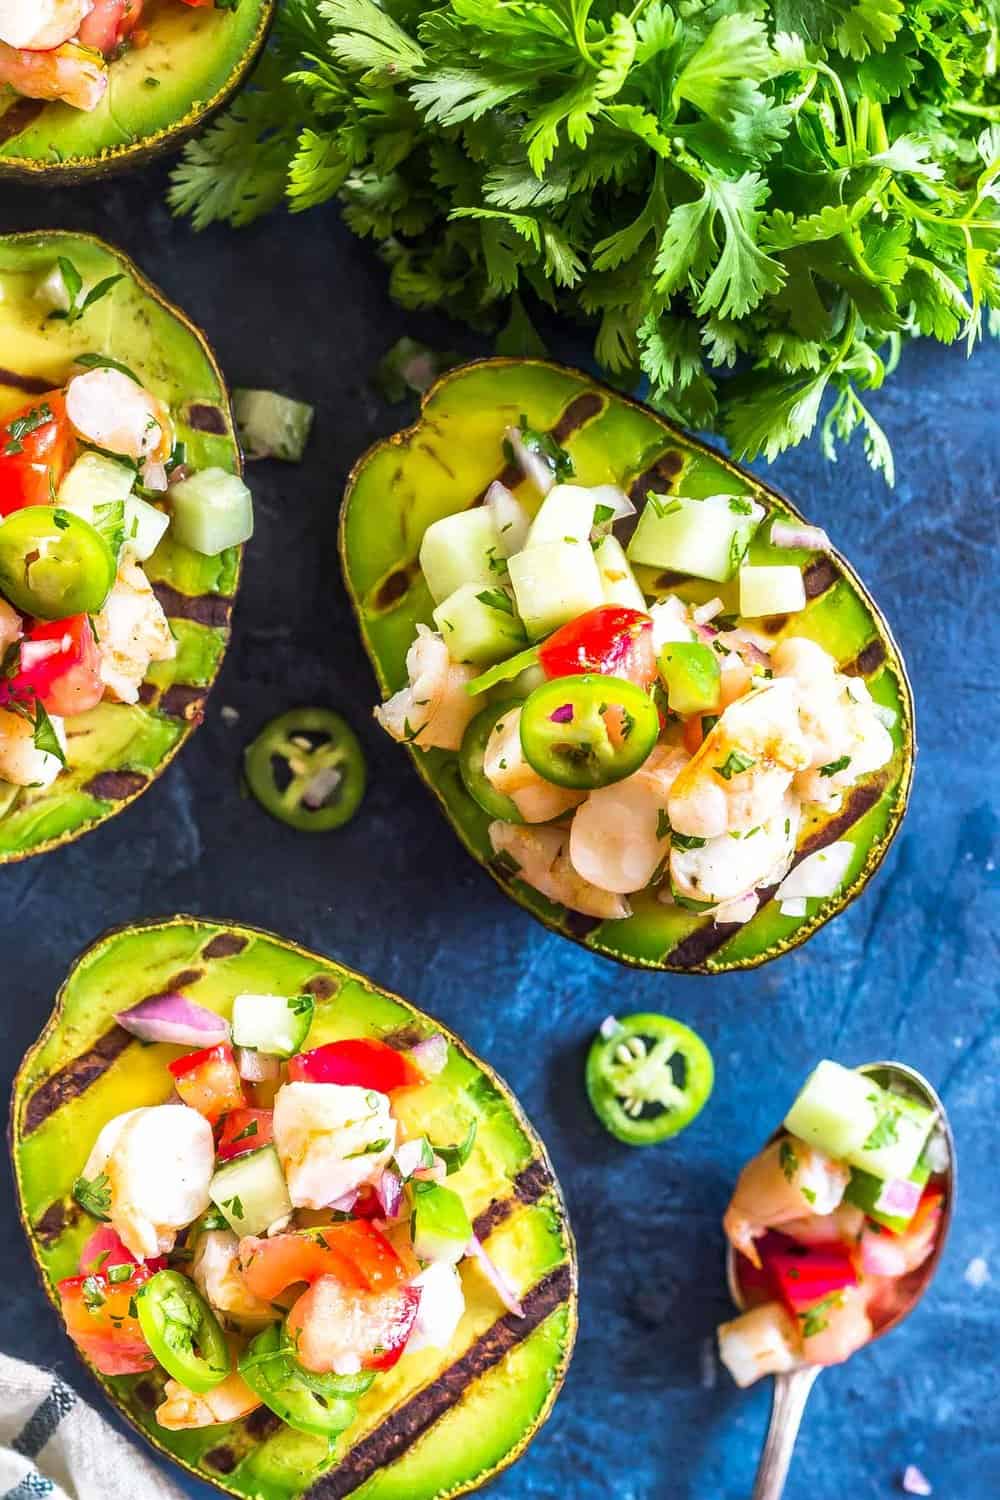 Grilled avocados stuffed with shrimp salsa